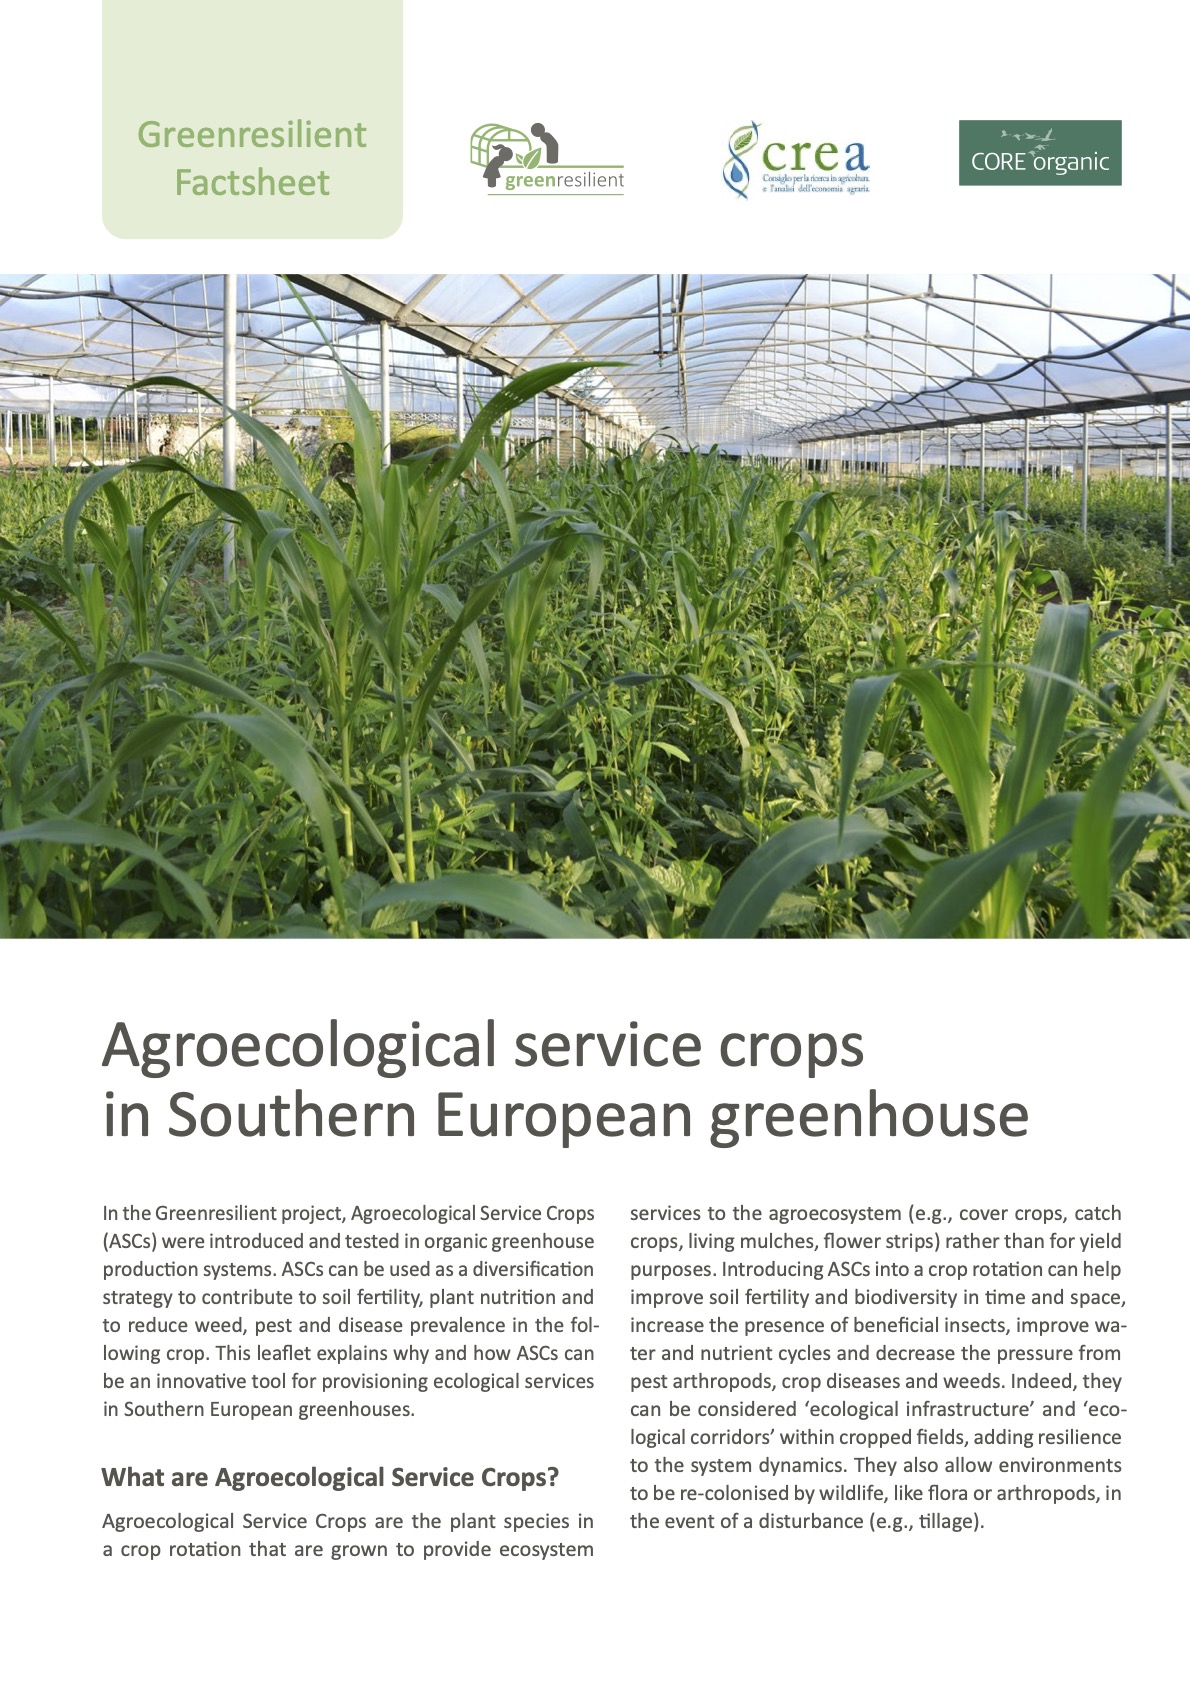 Agroecological service crops in Southern European greenhouse (Greenresilient Factsheet)